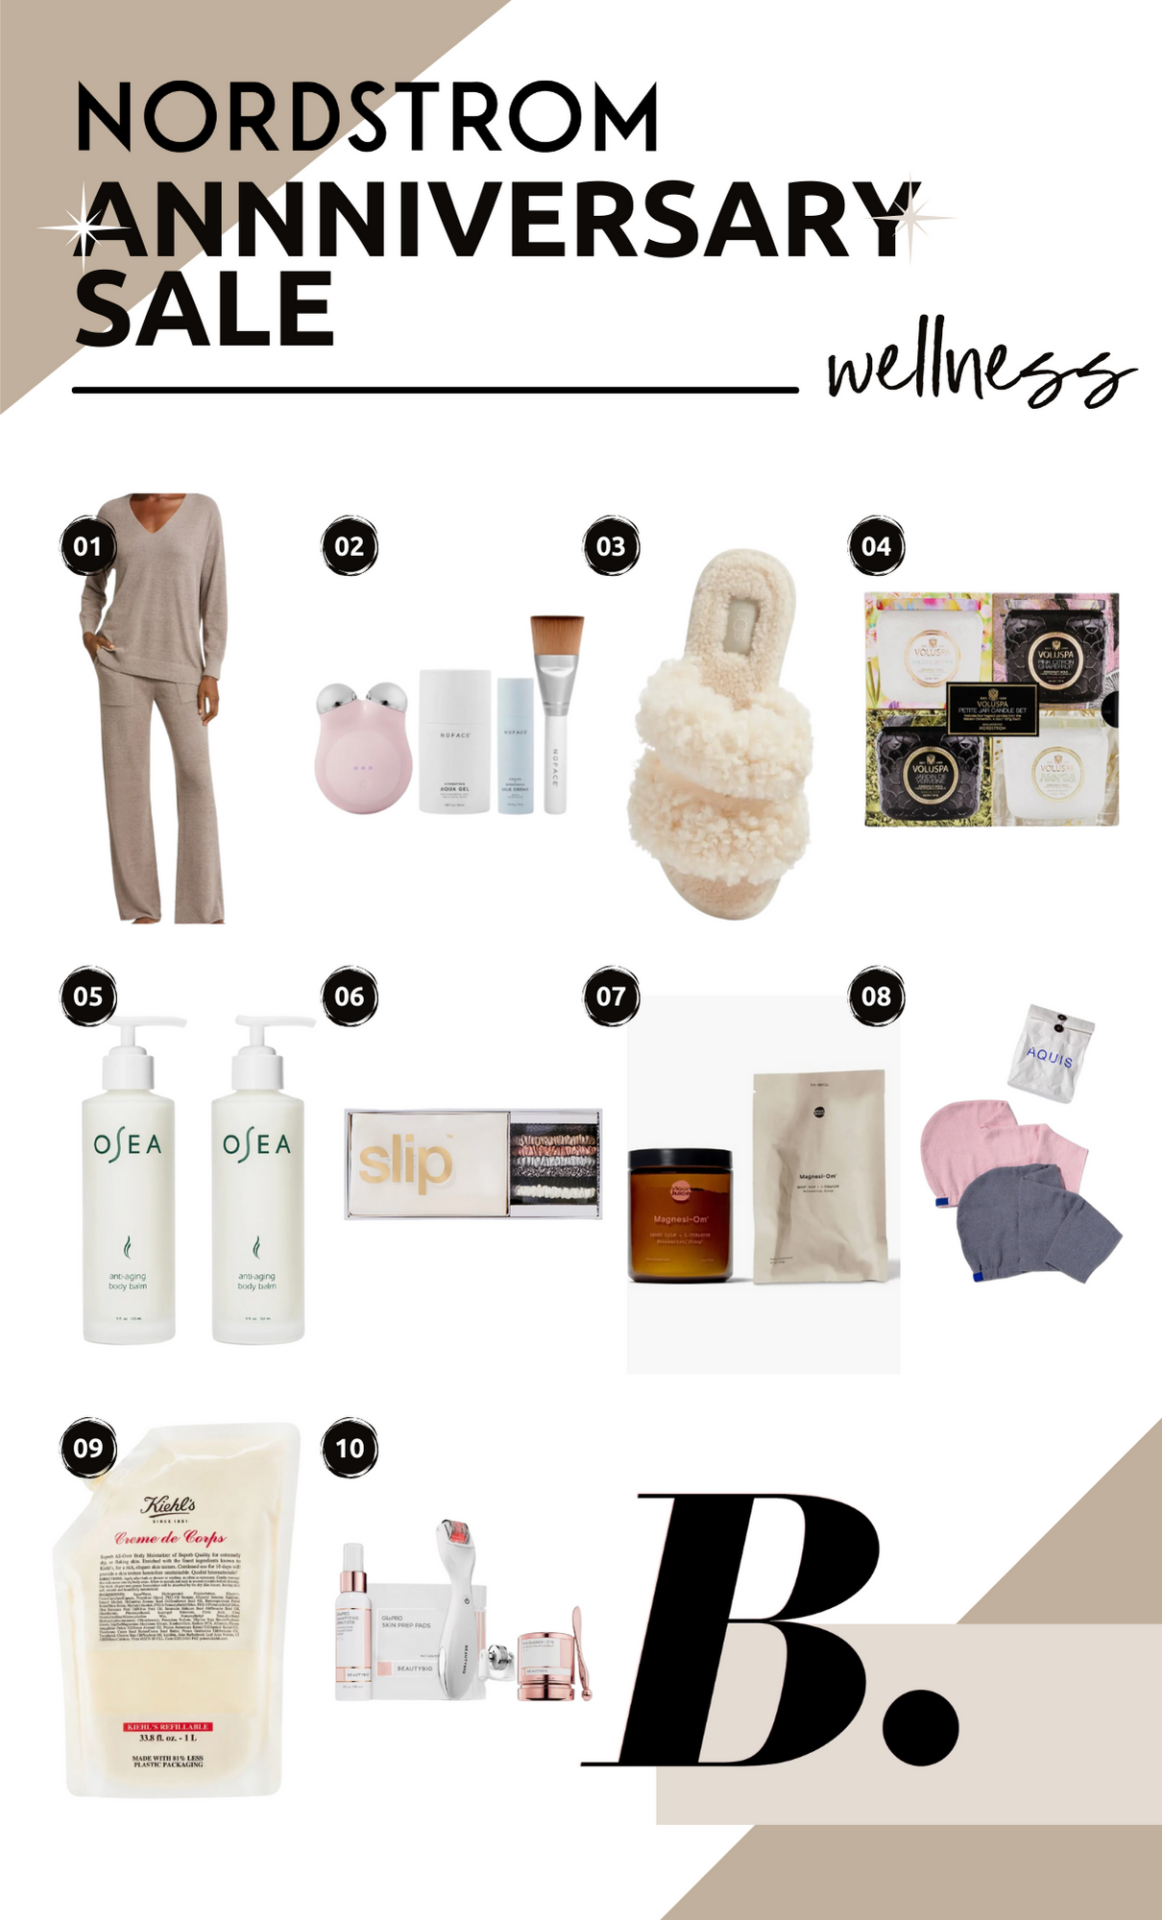 relaxing spa day at home, at home spa day kit, luxury spa at home, nsale, nsale 2023, nordstrom sale, nordstrom sale 2023, nordstrom anniversary sale, nordstrom anniversary sale 2023, nordstrom anniversary sale beauty, nordstrom anniversary sale wellness, what to buy at the nordstrom anniversary sale